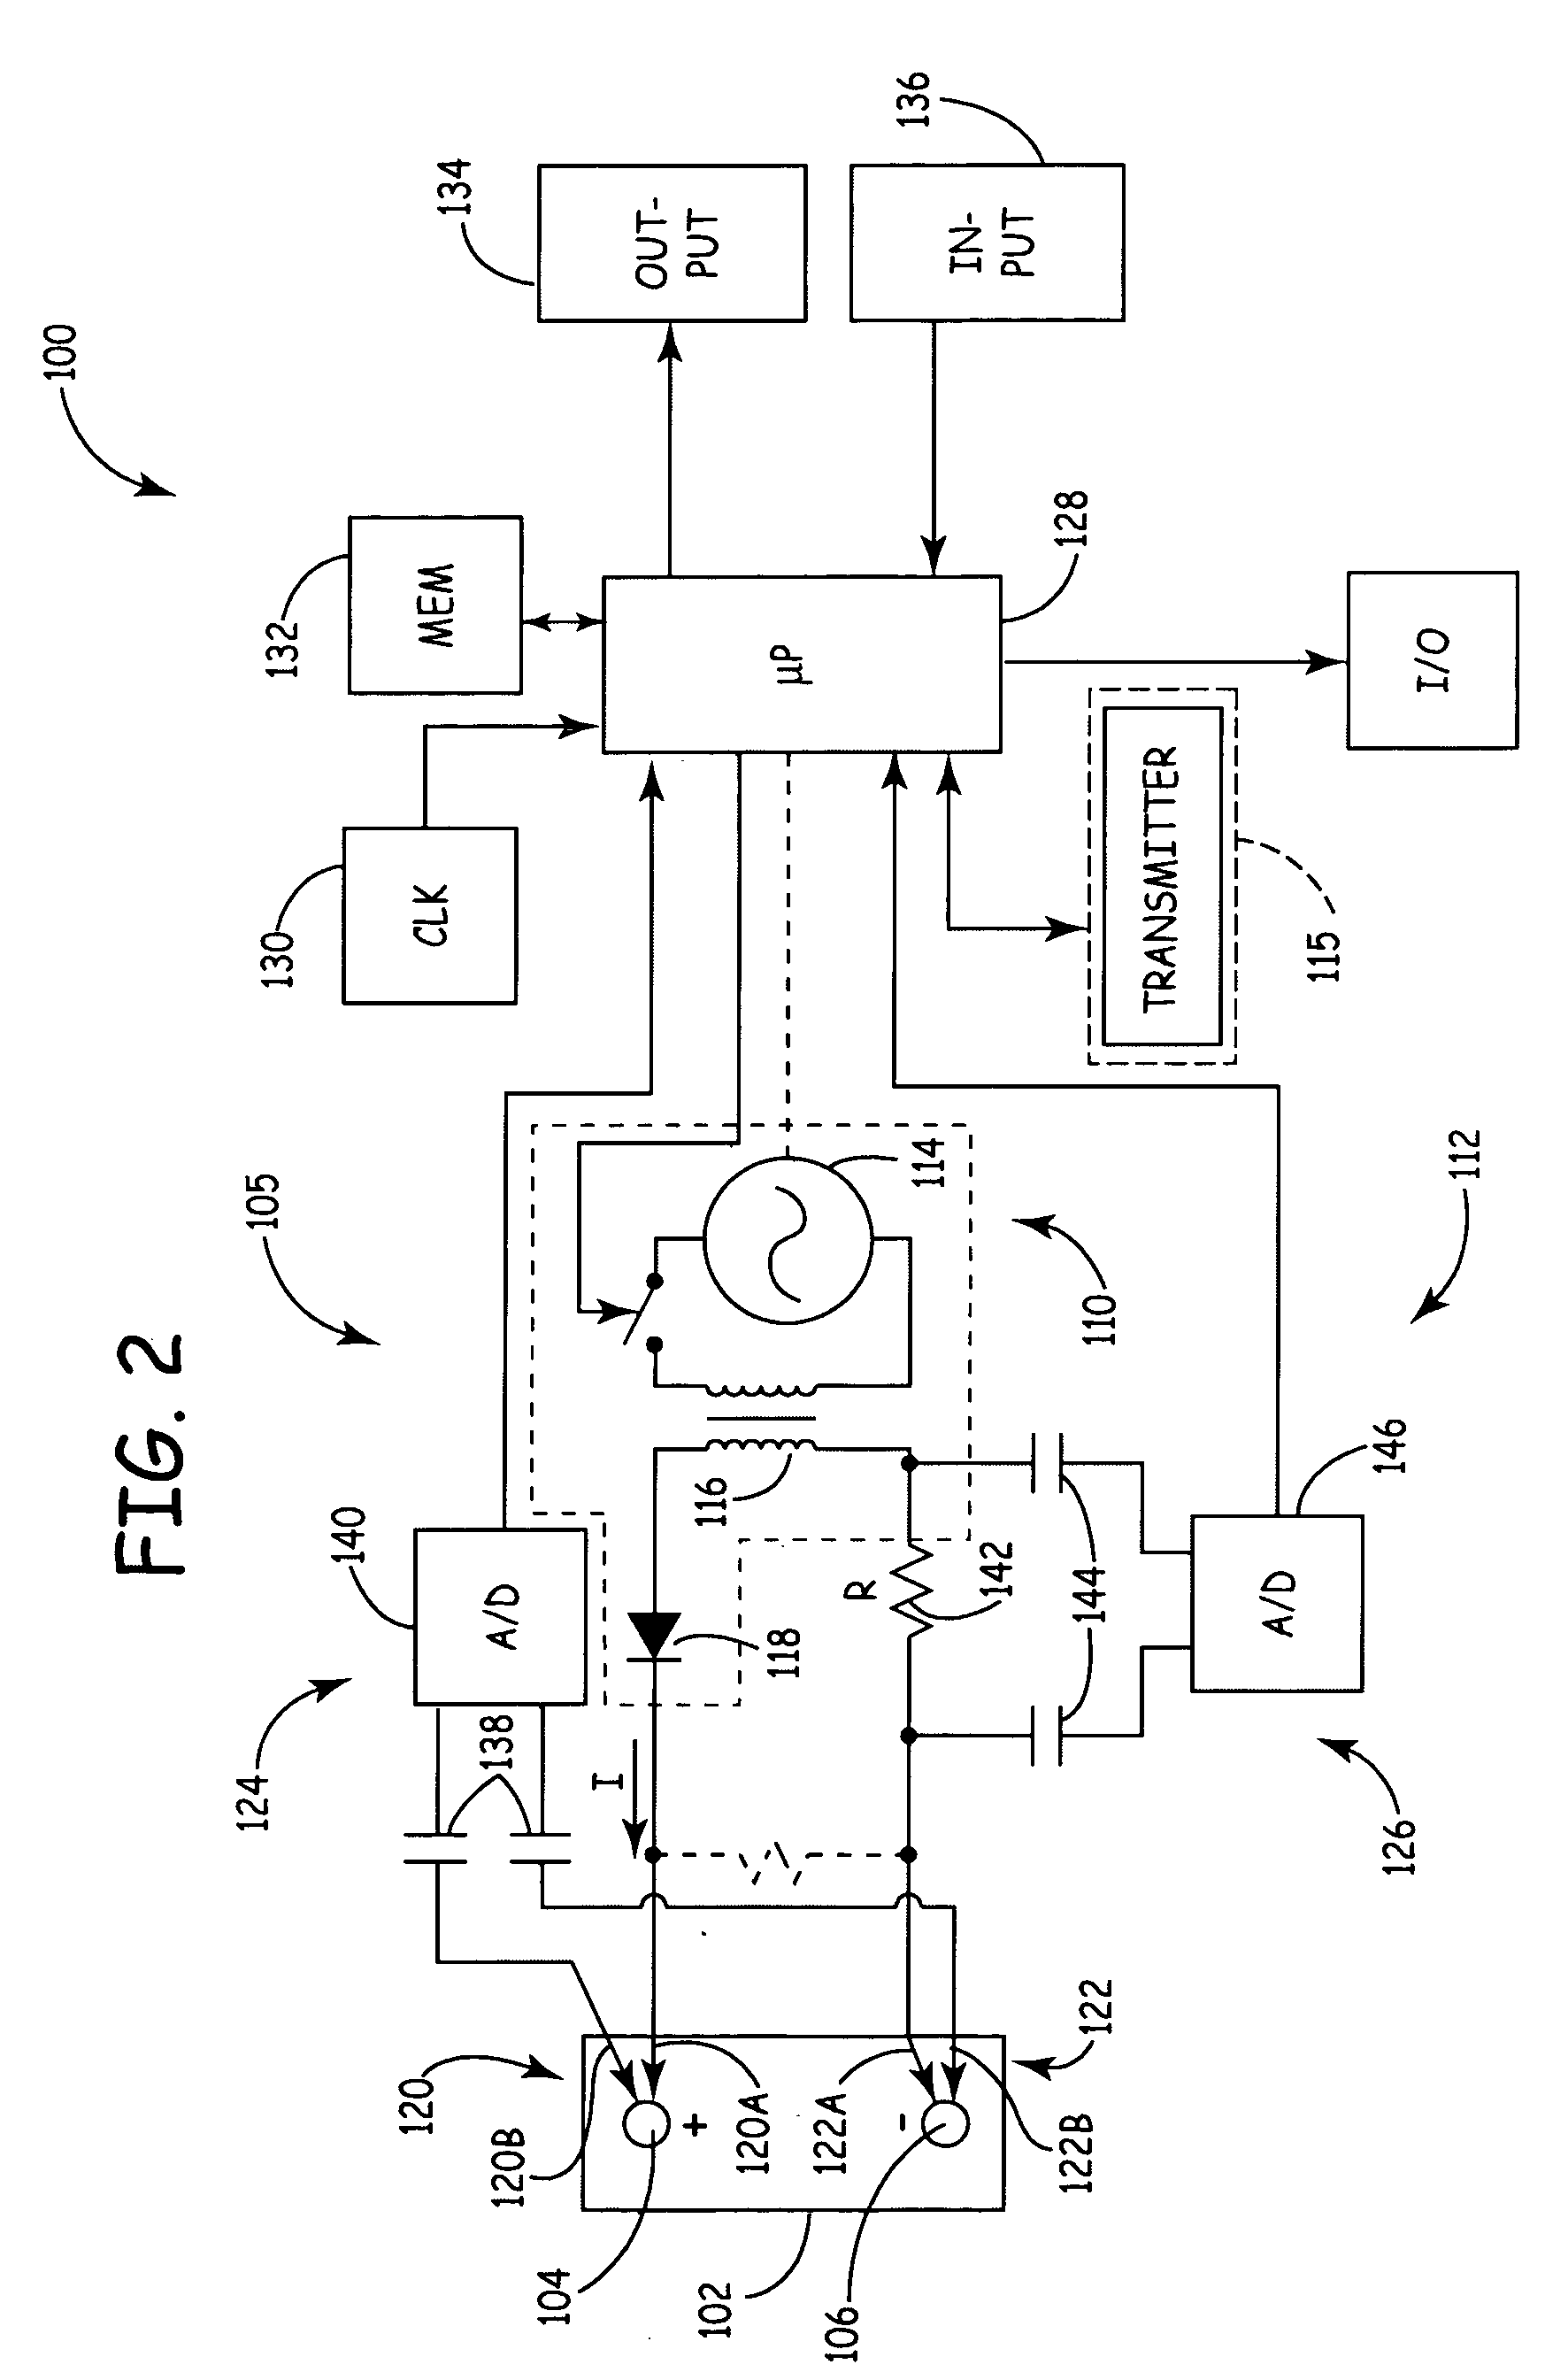 Battery charger with automatic customer notification system